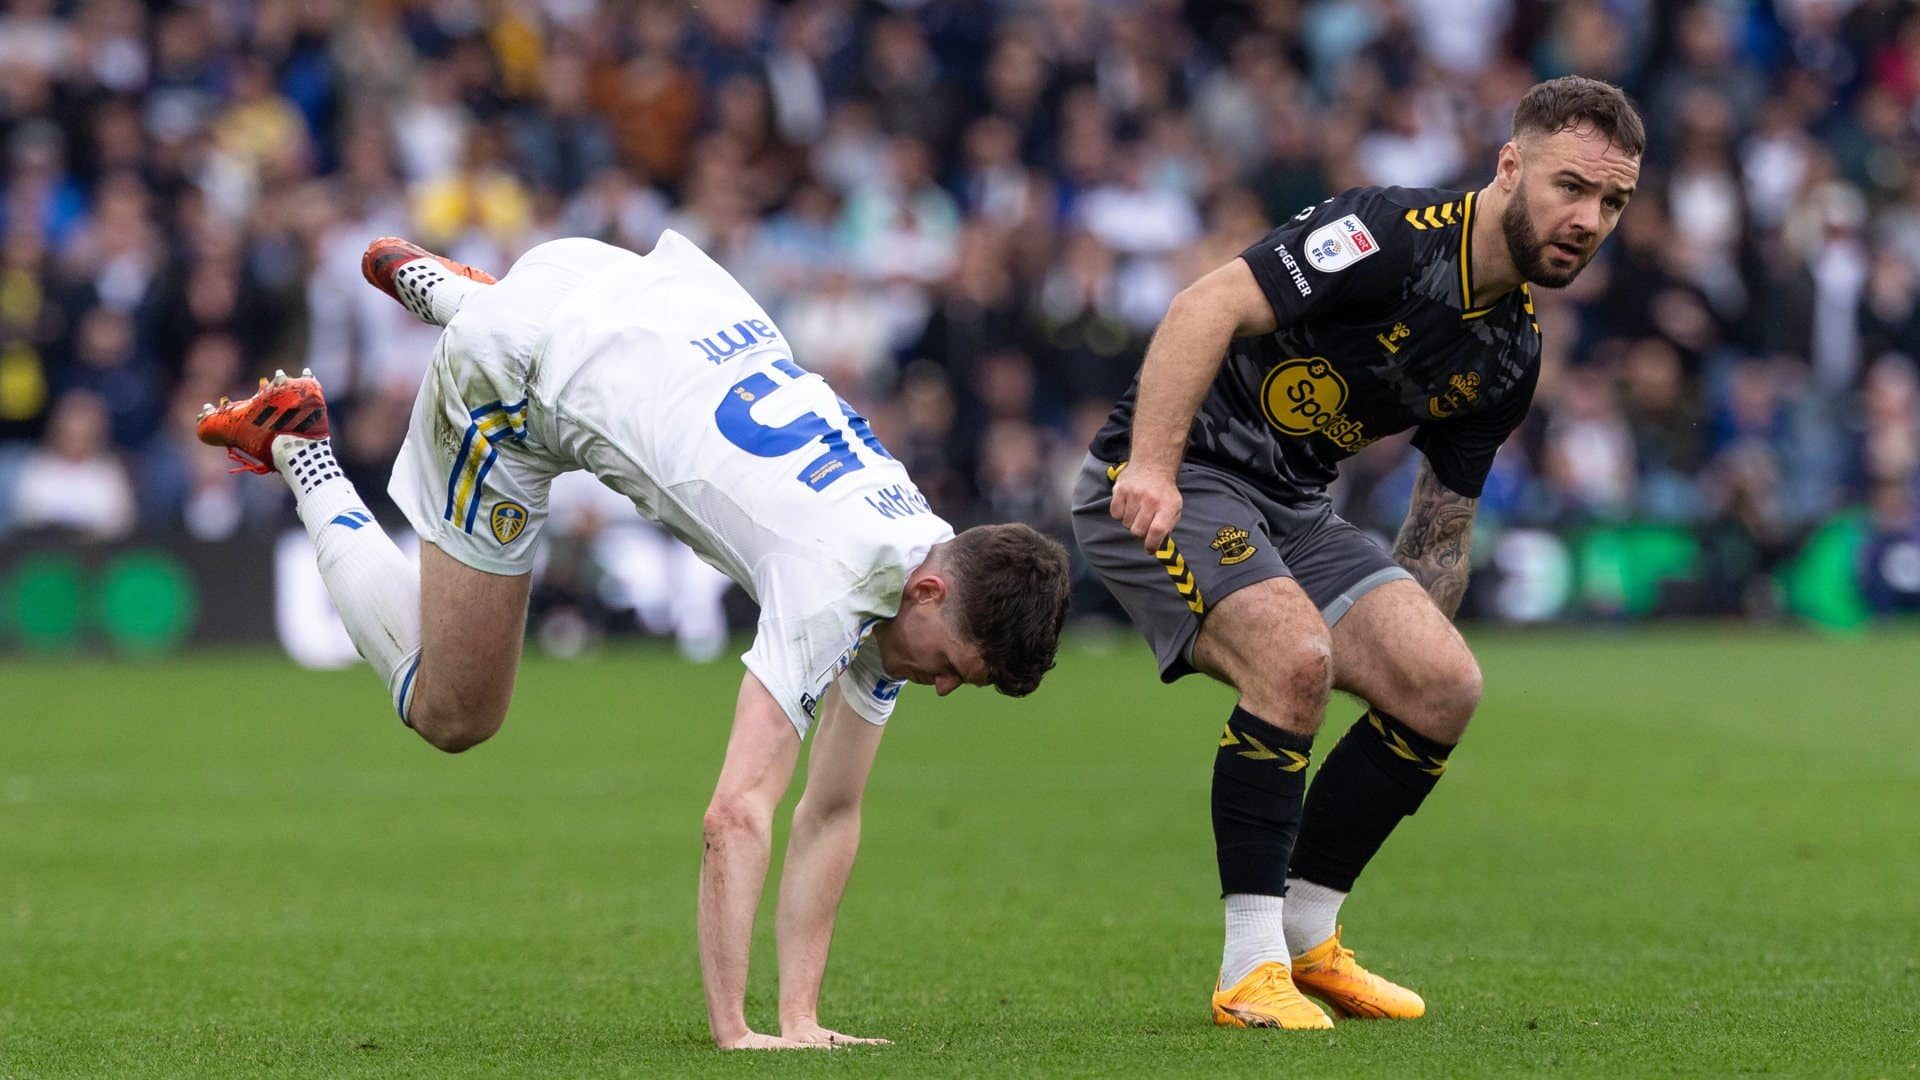 Sam Byram doing what would be a pretty impressive hand-spring if he was breakdancing